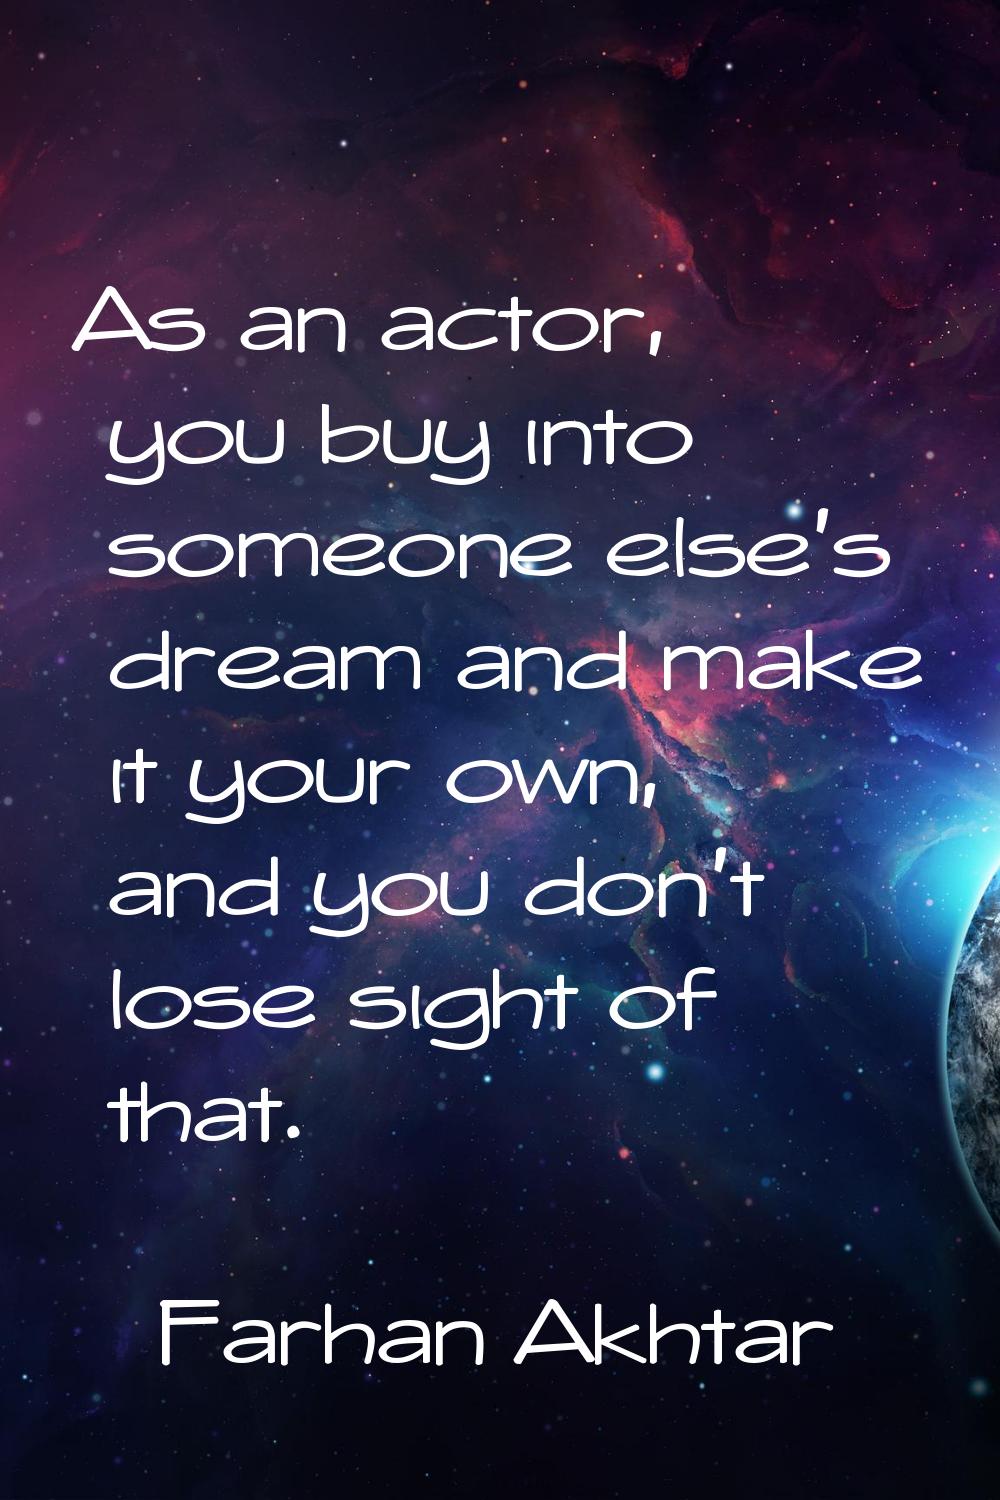 As an actor, you buy into someone else's dream and make it your own, and you don't lose sight of th